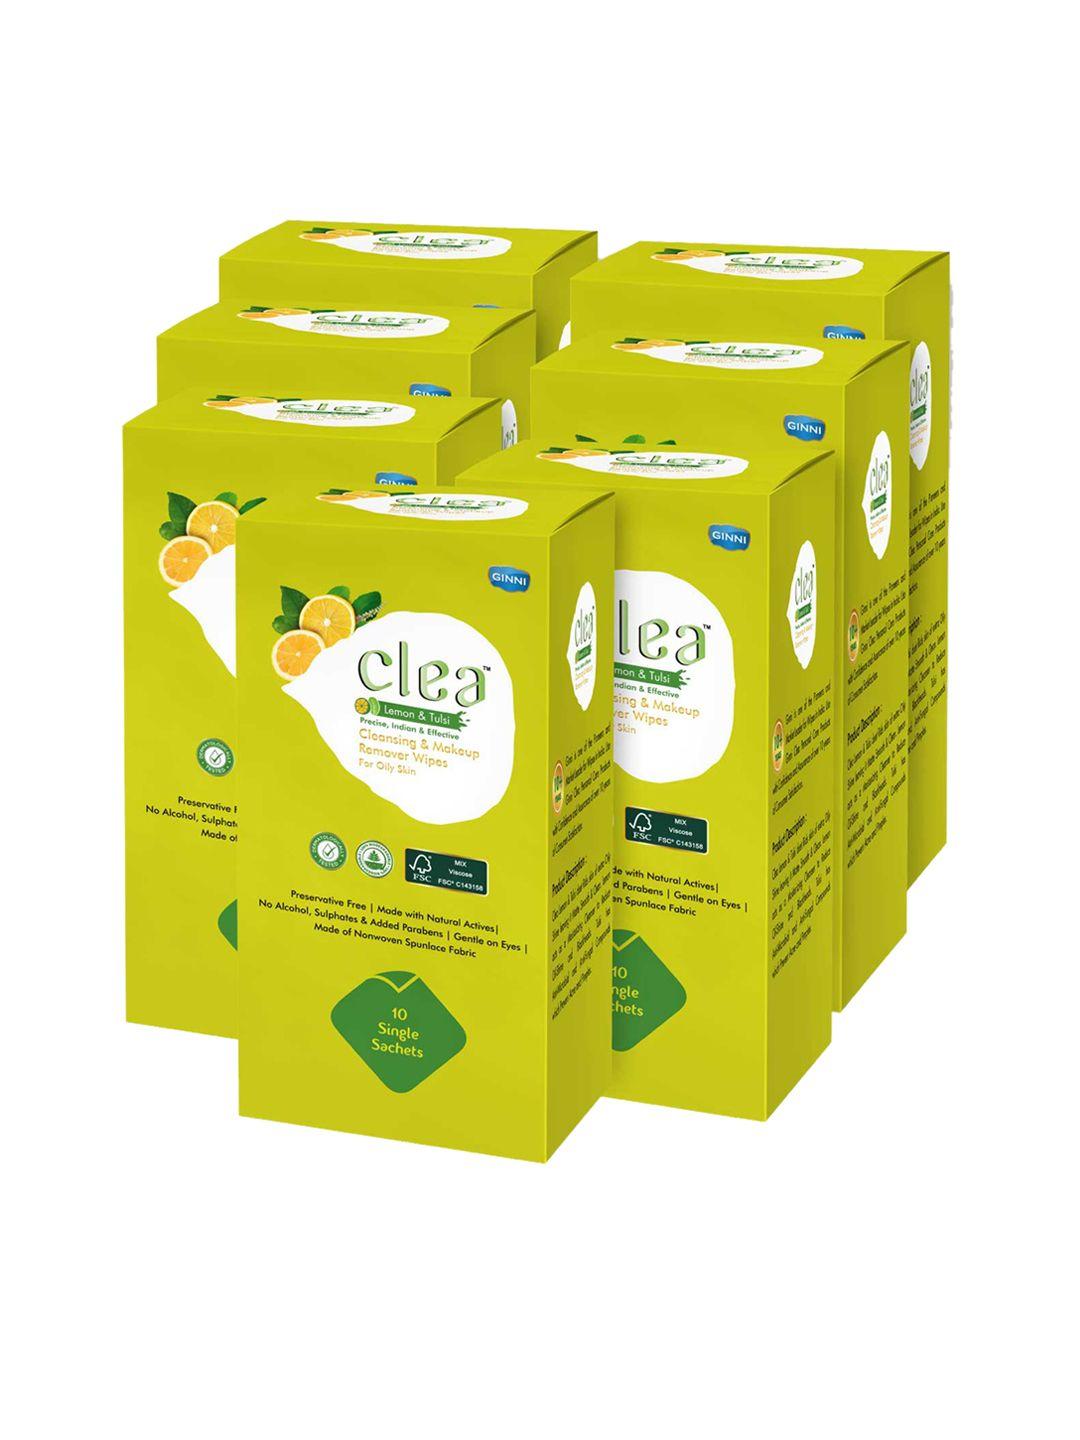 clea set of 7 lemon & tulsi cleansing & makeup remover wet wipes - 10 pulls each